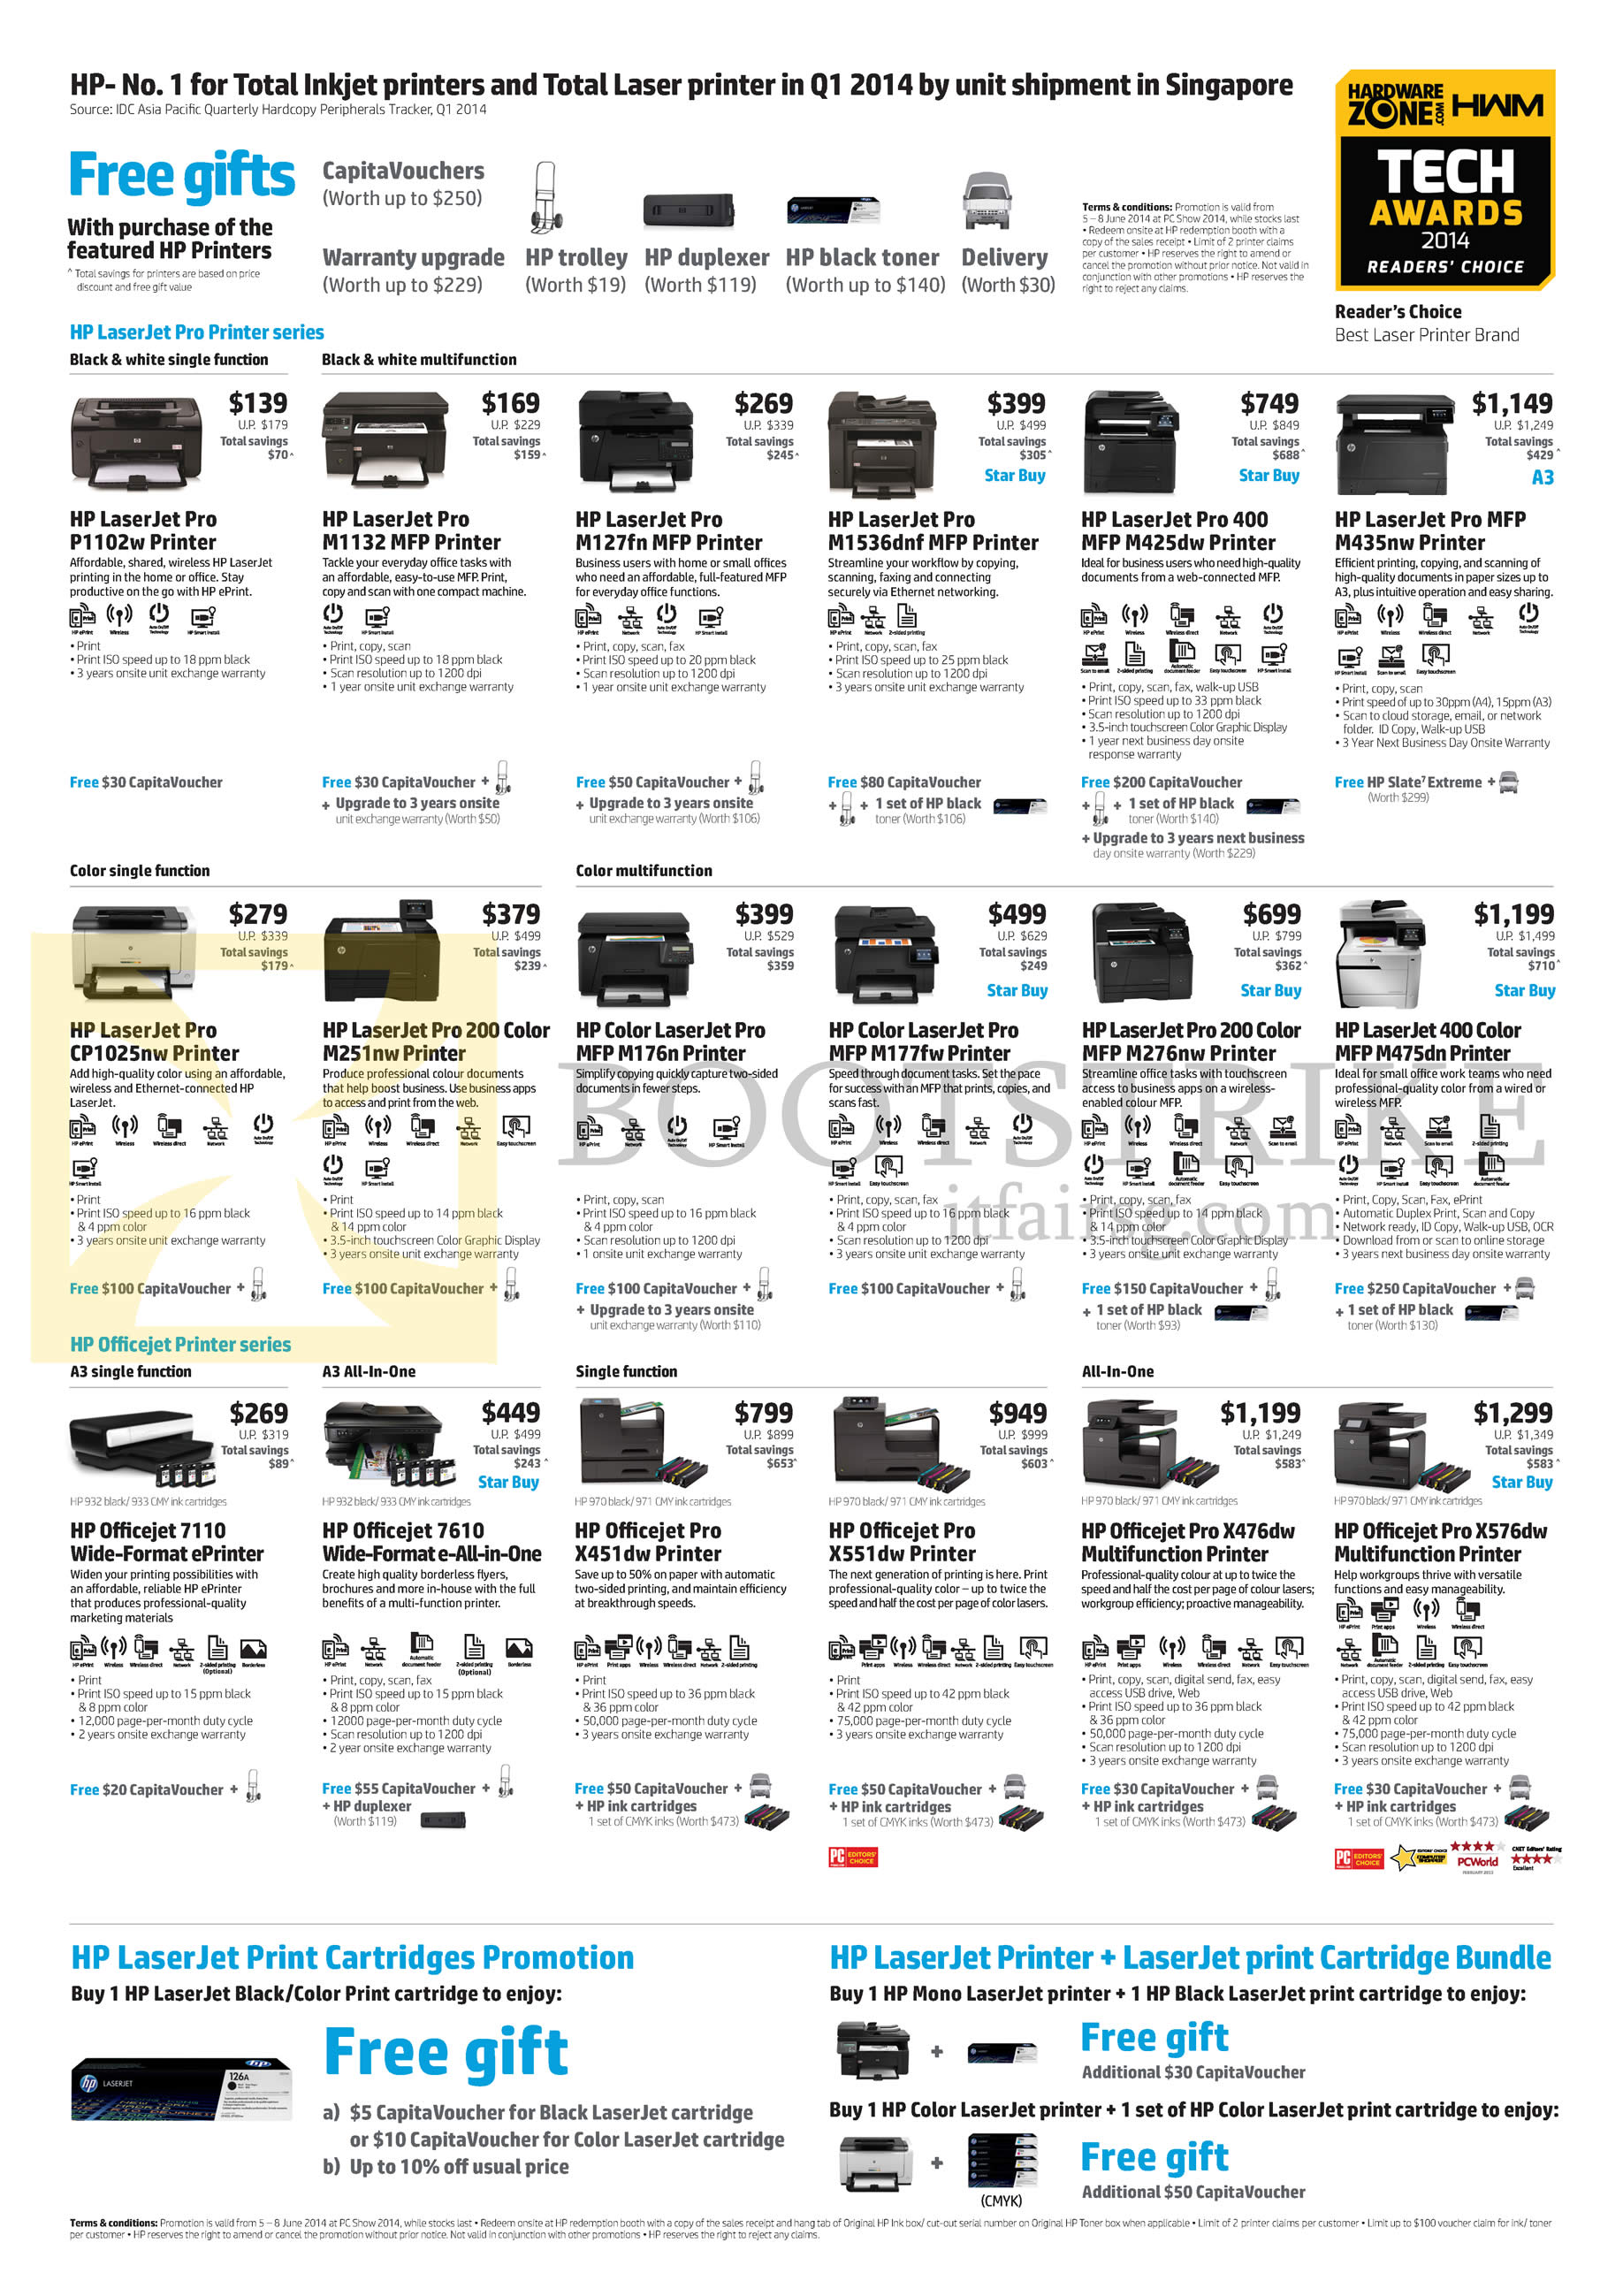 PC SHOW 2014 price list image brochure of HP Printers LaserJet Pro P1102w, M1132, M127fn, M425dw, CP1025nw, M176n, M177fw, M475dn, Officejet 7110, 7610, Pro X451dw, X551dw, X476dw, X576dw